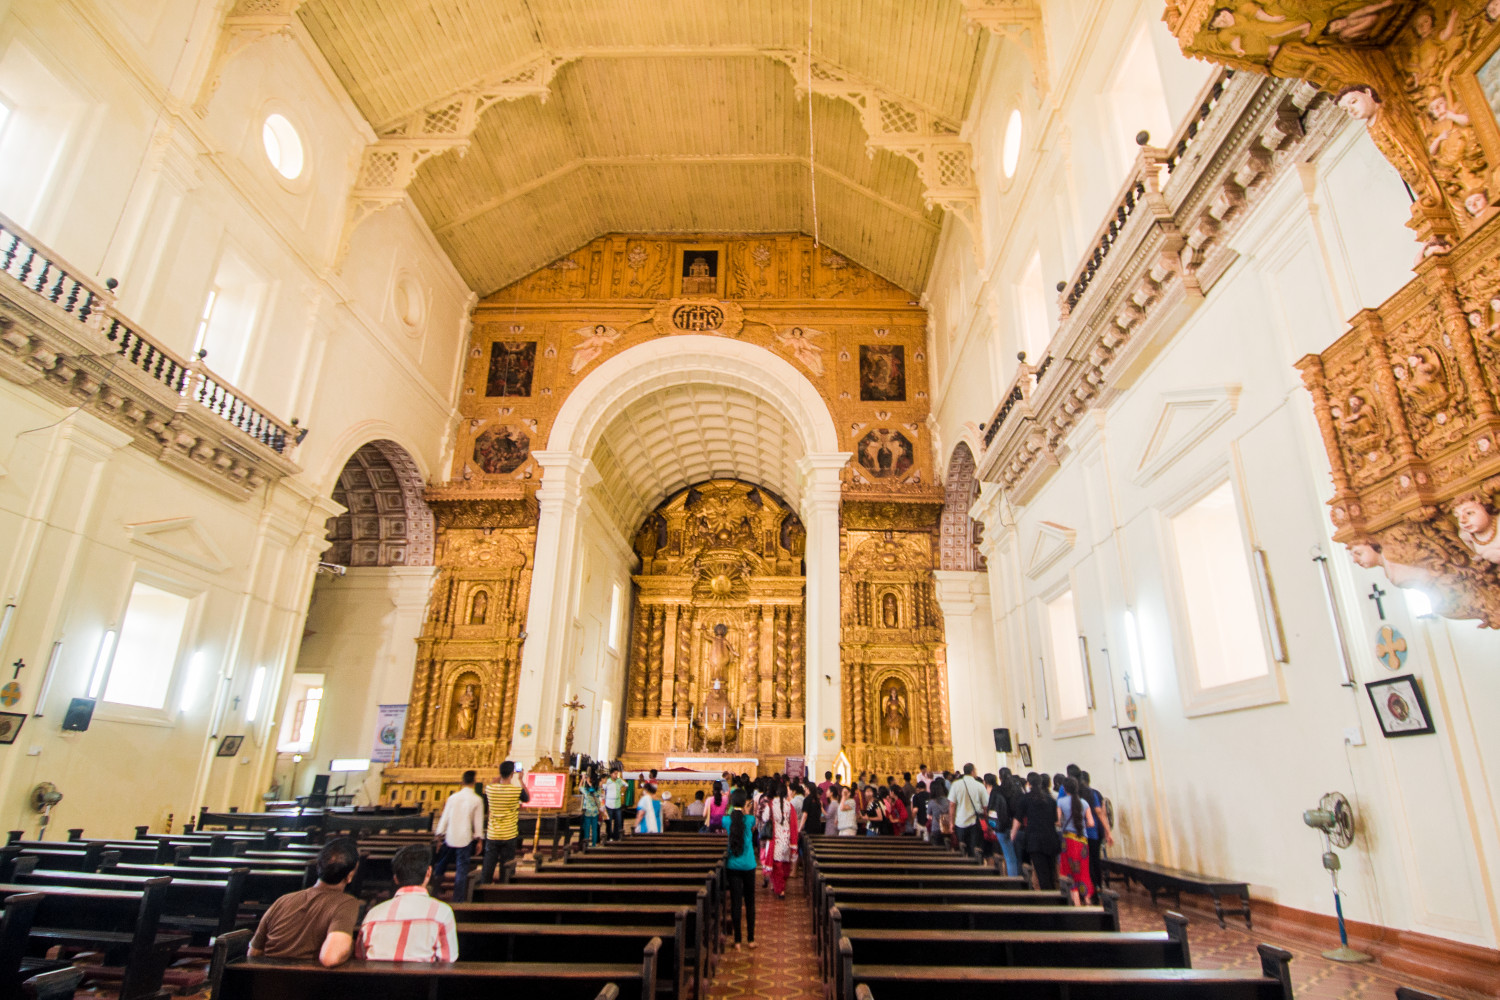 Inside the Basilica of Bom Jesus, Old Goa. Image by Paul Harding / Lonely Planet